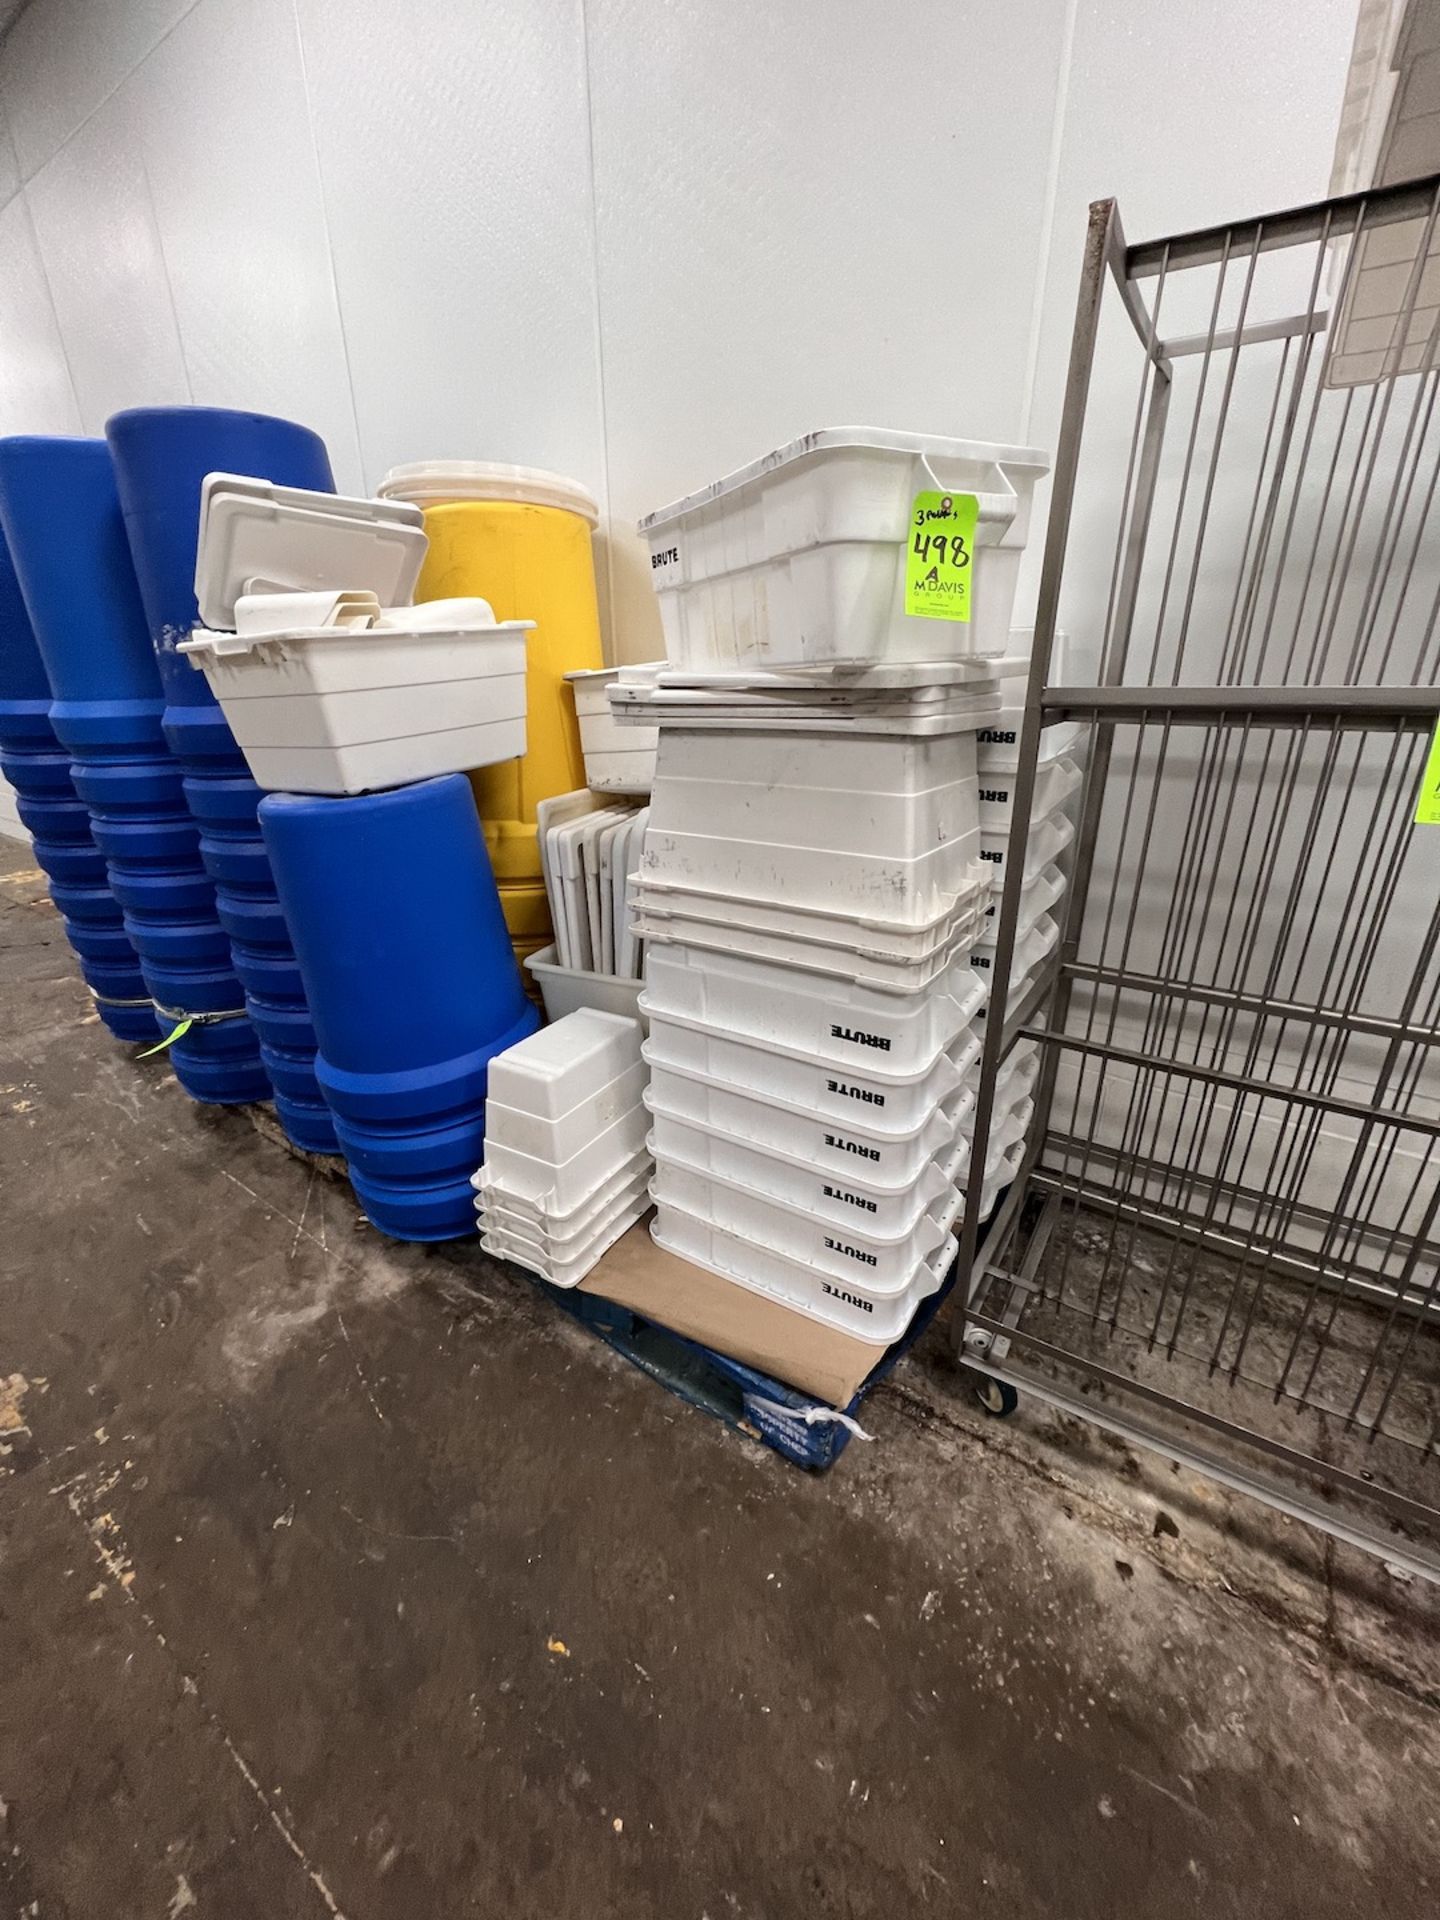 (3) PALLETS OF ASSORTED PLASTIC BINS, BRUTE TOTES WITH LIDS, GREIF BARRELS WITH METAL LOCK BANDS